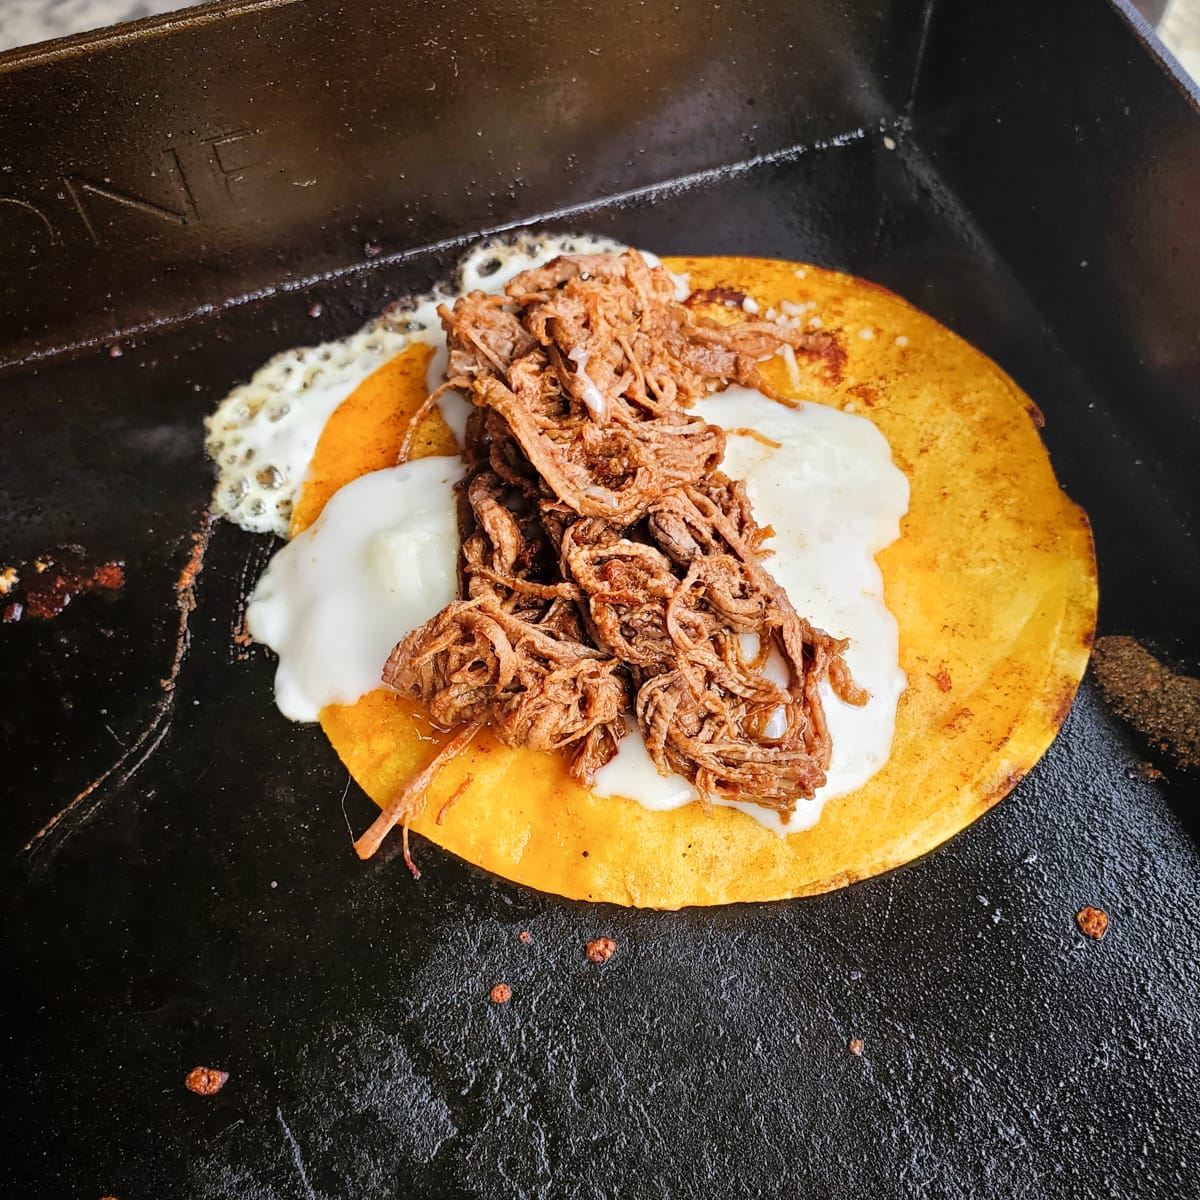 Making Quesabirria tacos with leftover brisket on a Blackstone.